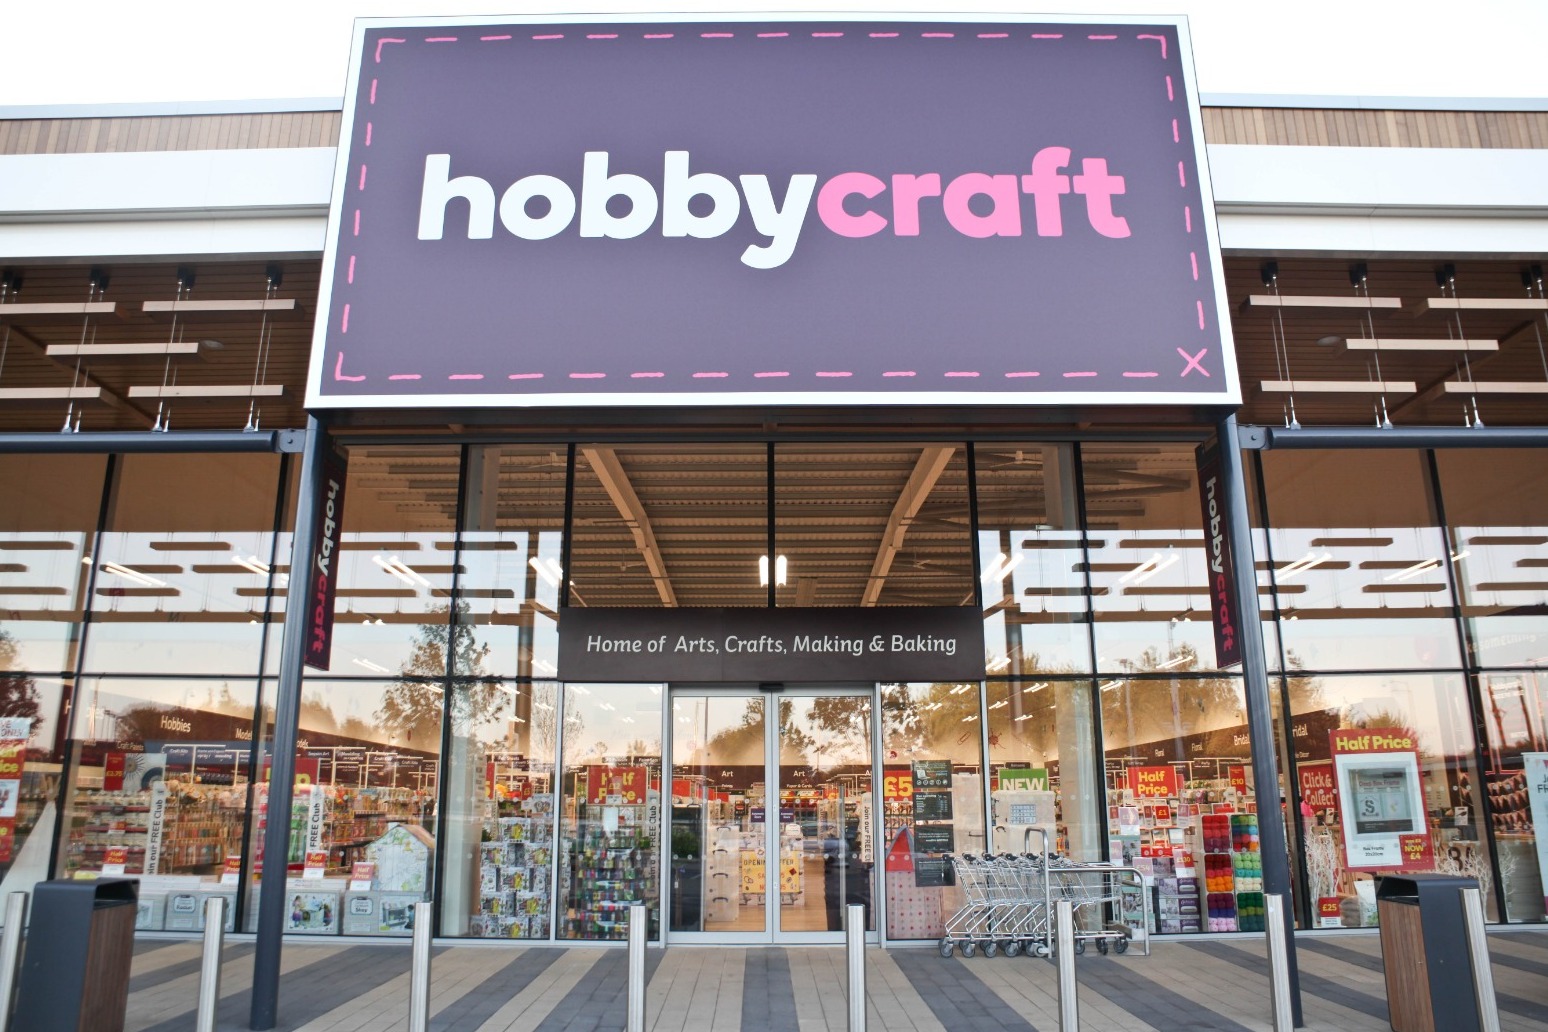 Handmade Christmas presents and decorations boost Hobbycraft sales 